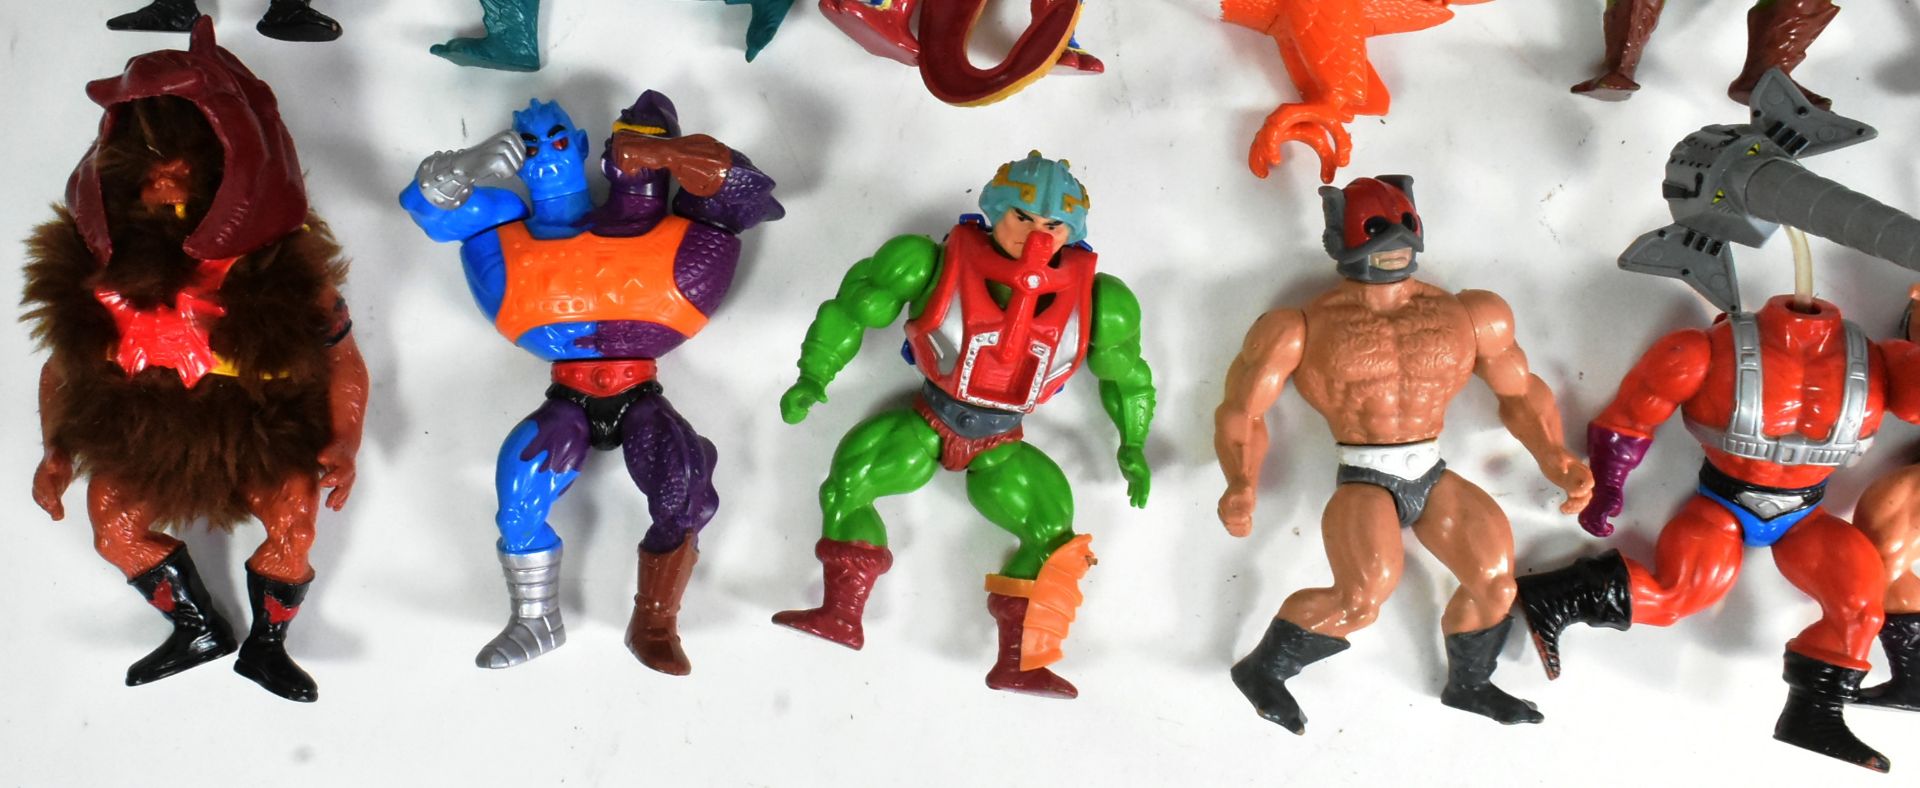 MASTERS OF THE UNIVERSE - MOTU - COLLECTION OF ACTION FIGURES - Image 5 of 6